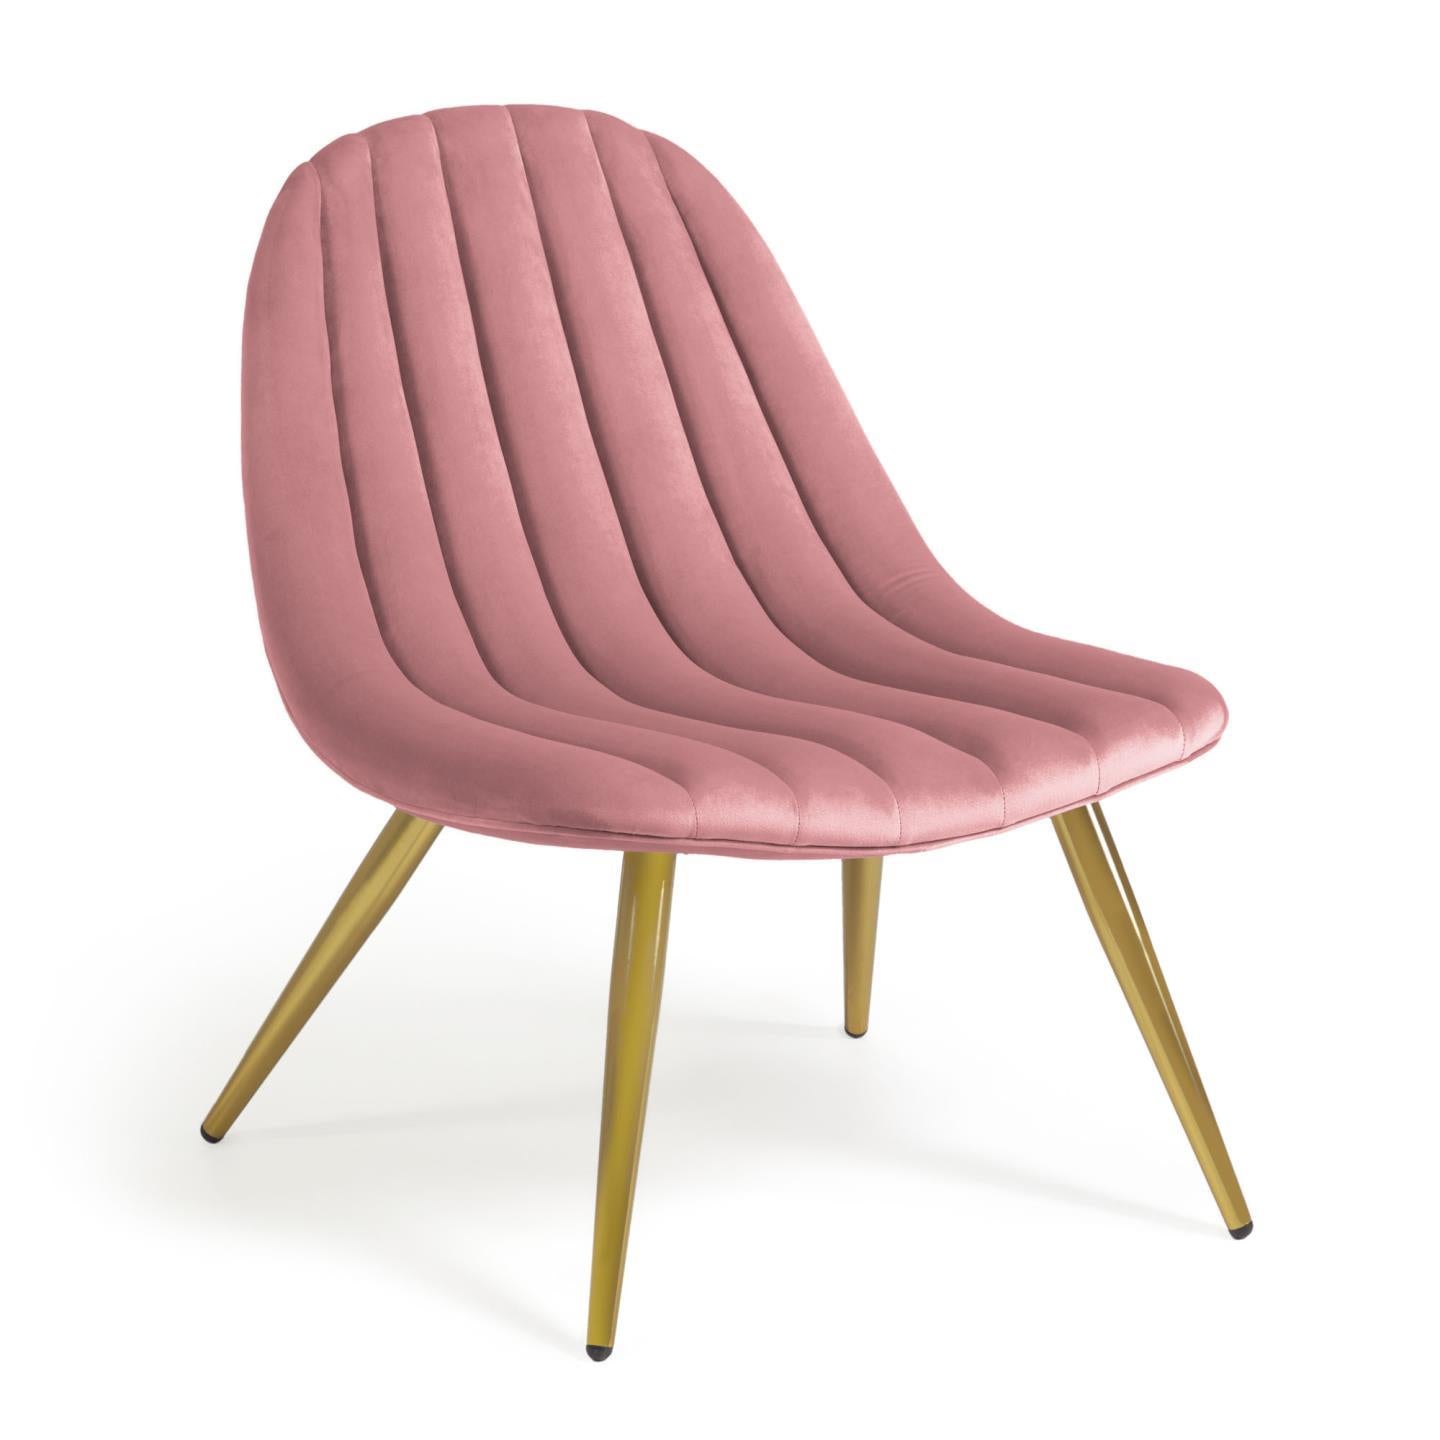 Marlene pink velvet chair with steel legs with gold finish